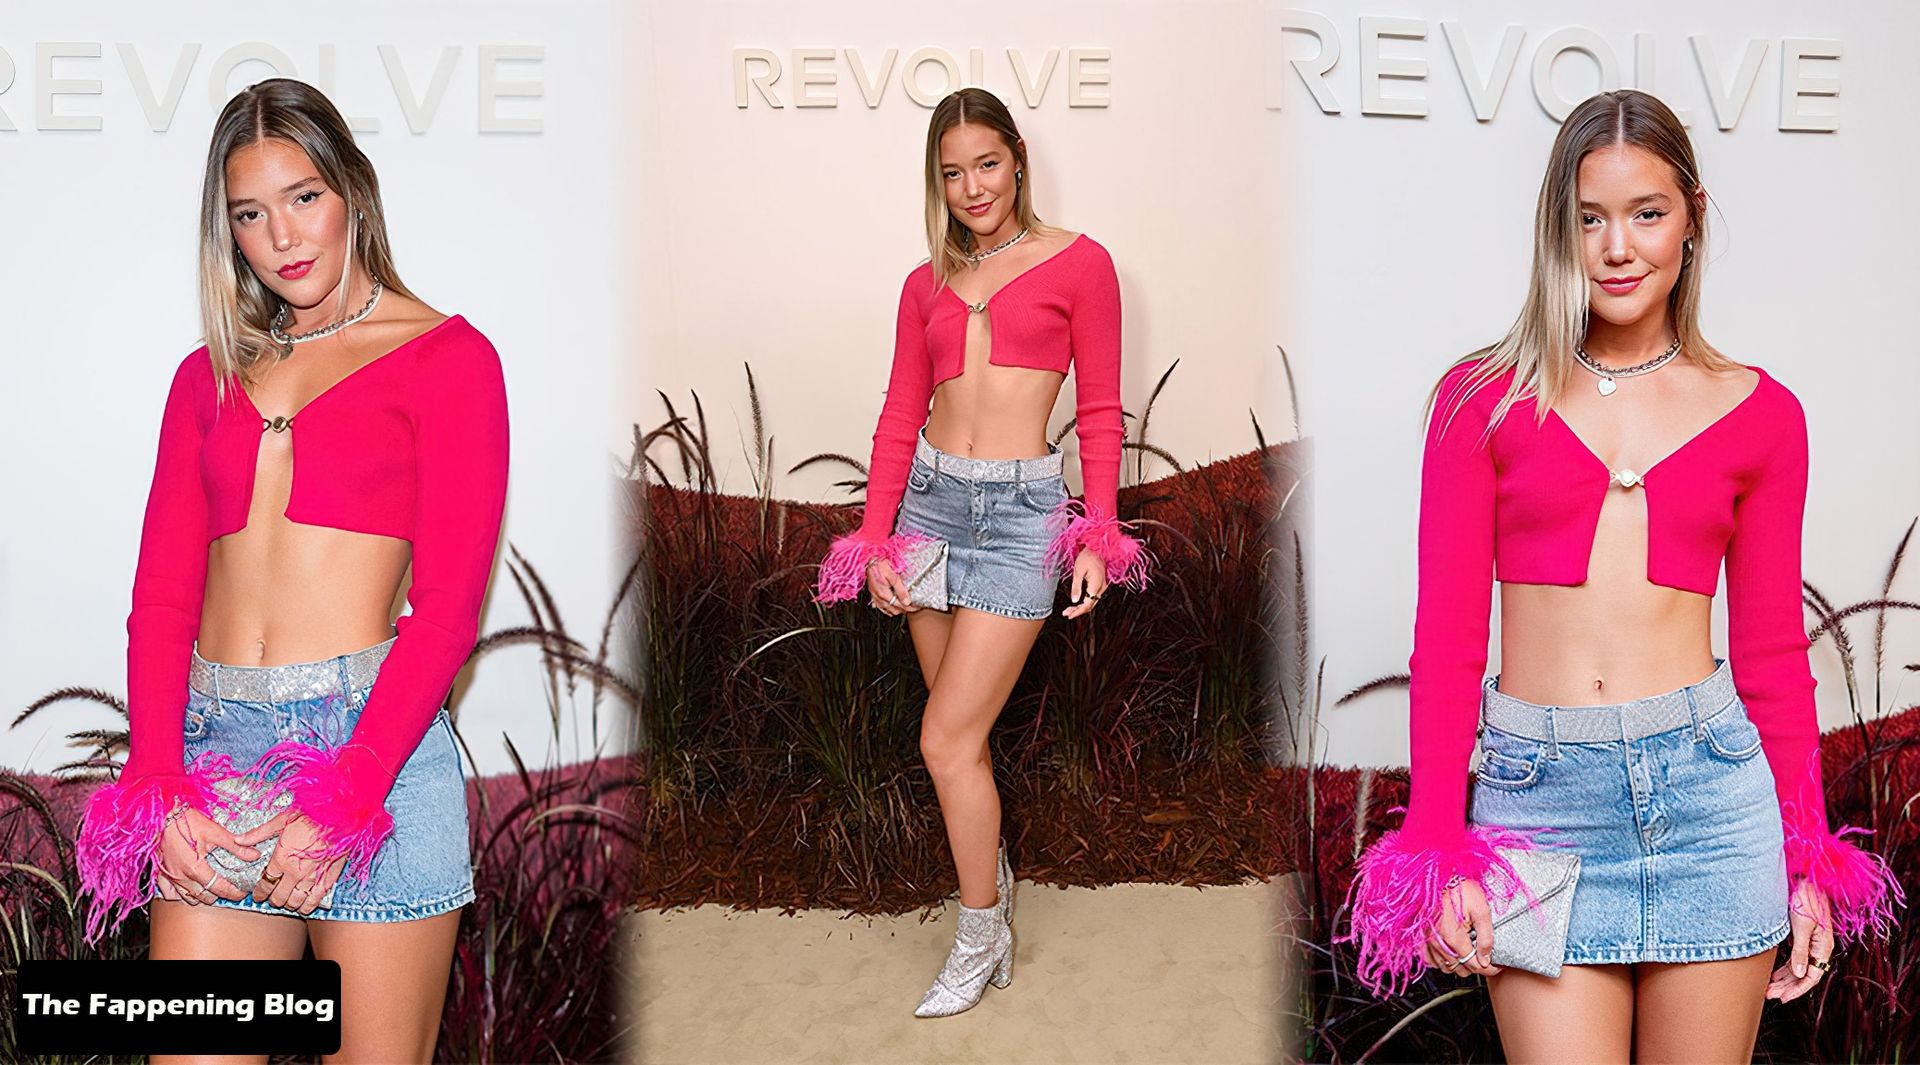 Olivia Ponton Sexy The Fappening Blog 15 - Olivia Ponton Goes Braless as She Arrives at the Revolve Event in Manhattan (15 Photos)